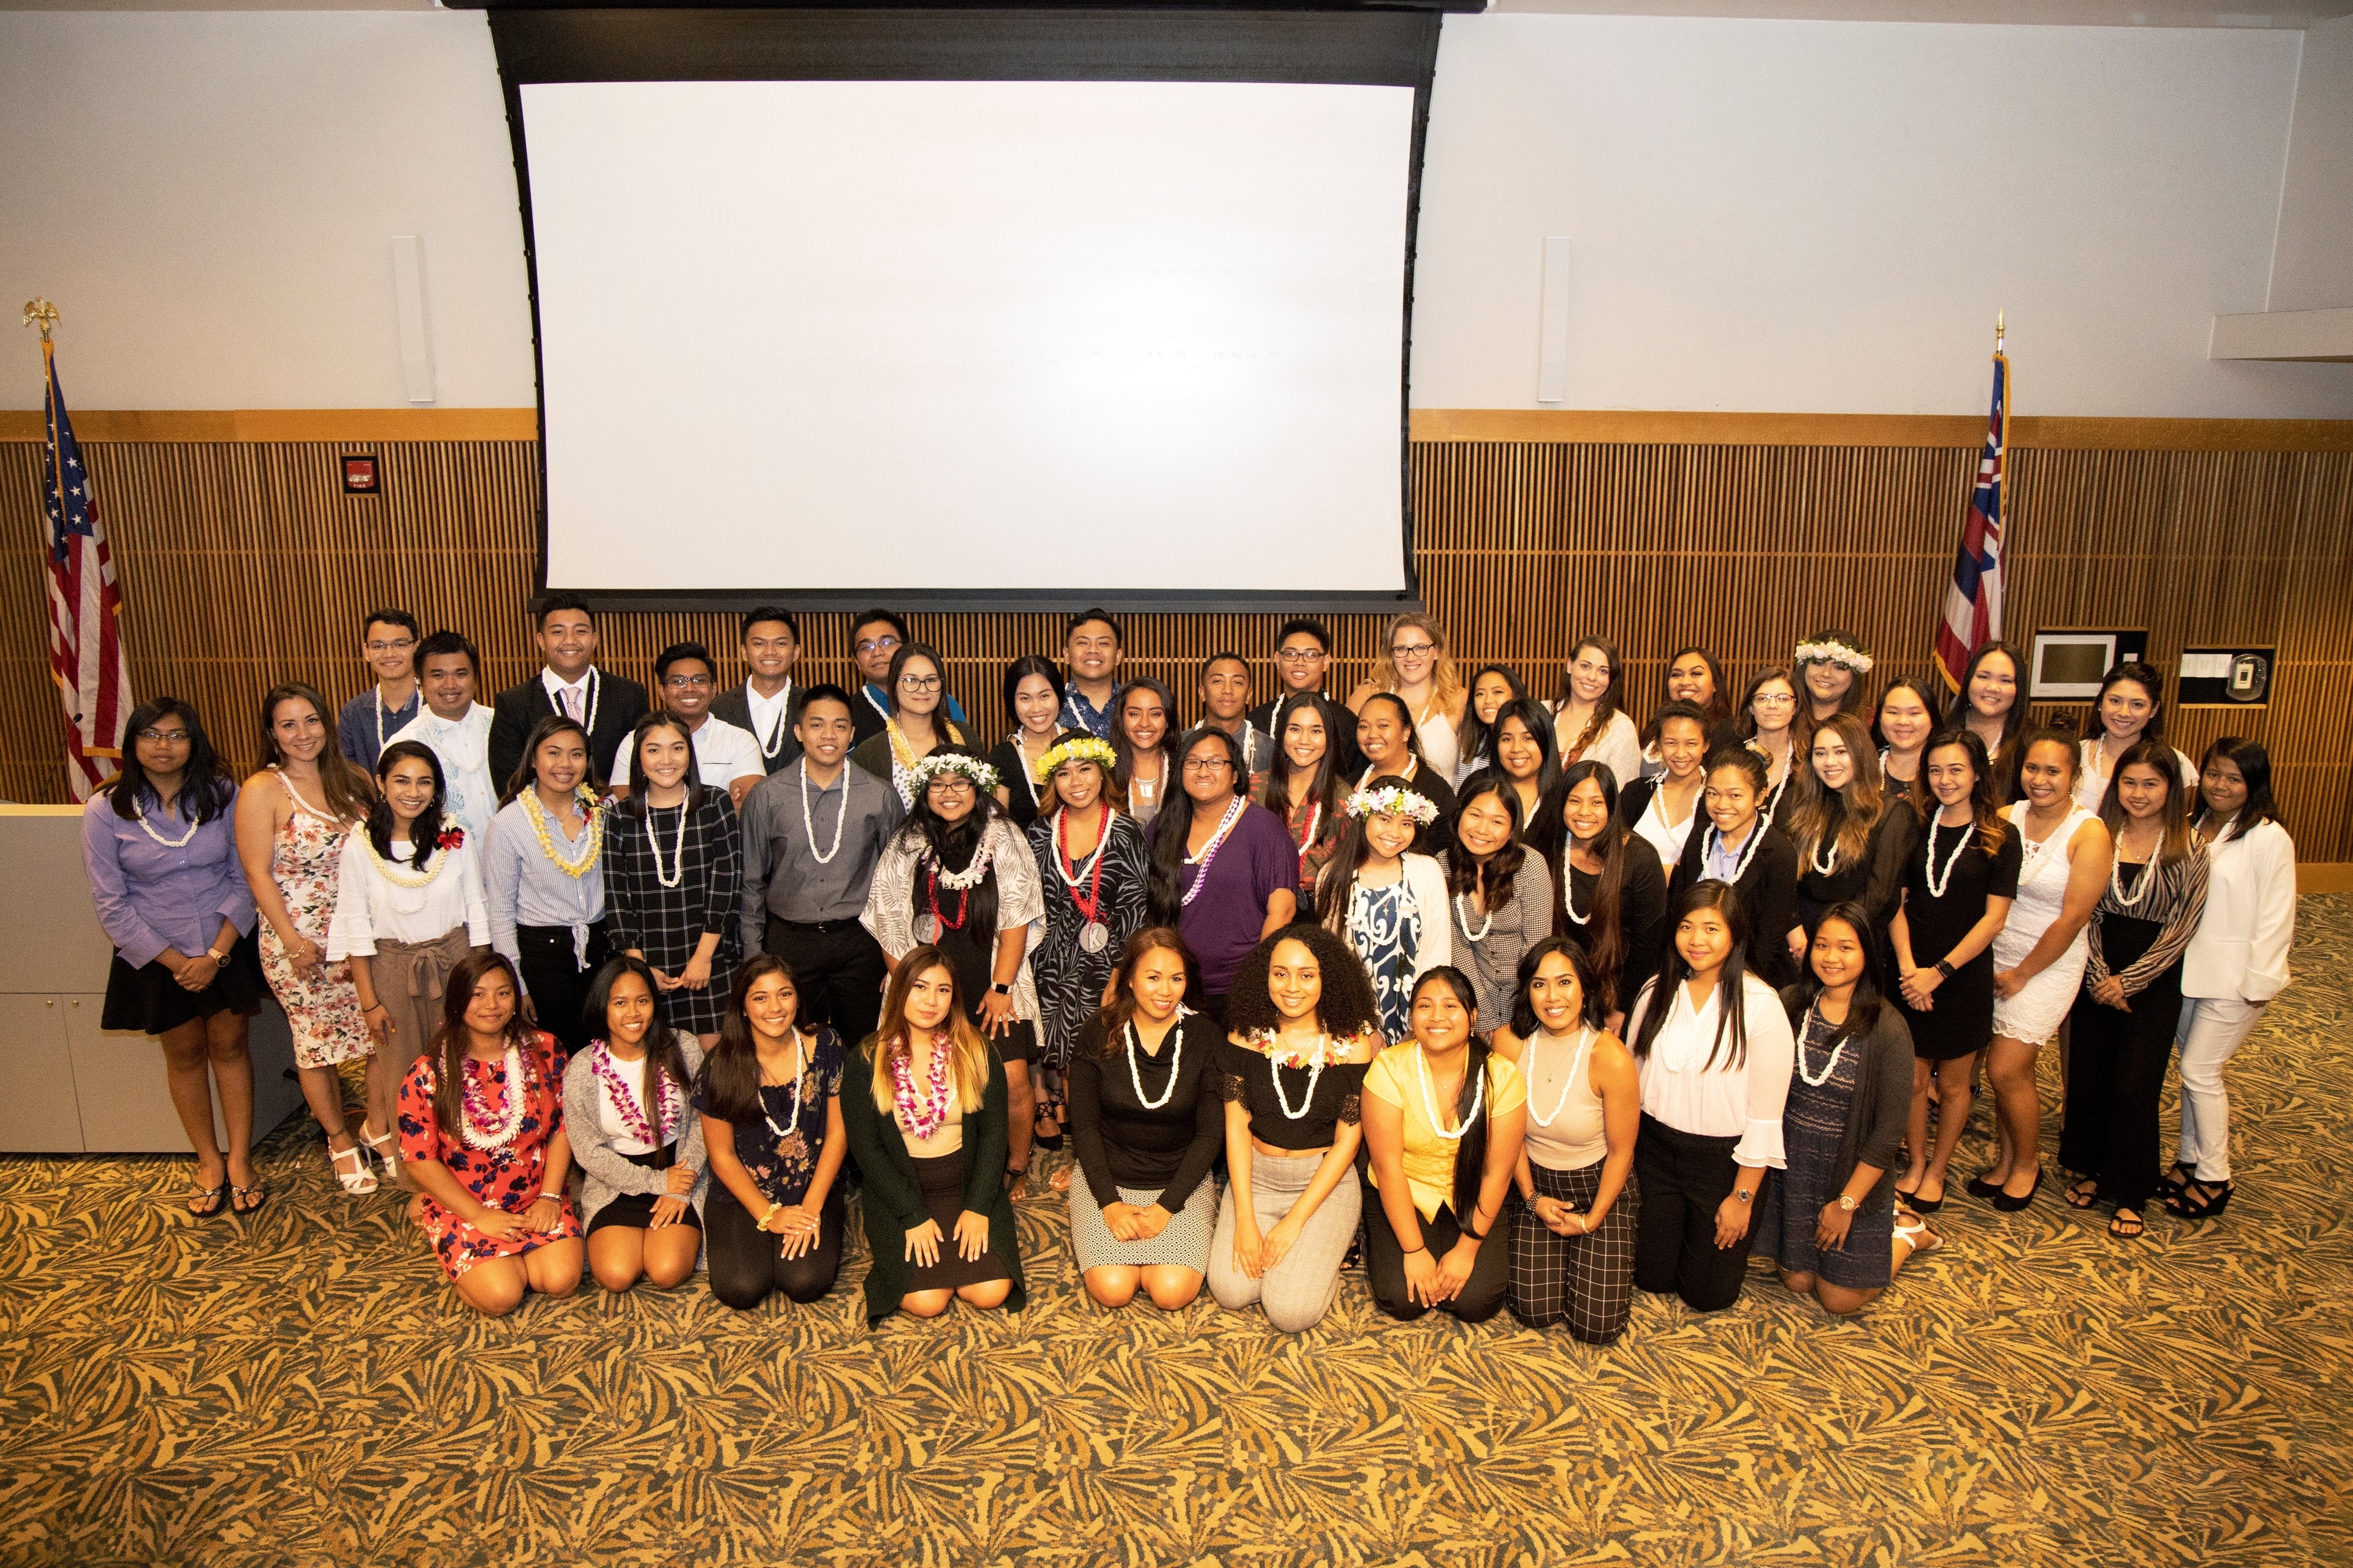 Photo of more than 55 students who are standing and kneeling at the NSLS induction ceremony. The group shot was taken in the Campus Center Multi-Purpose room.